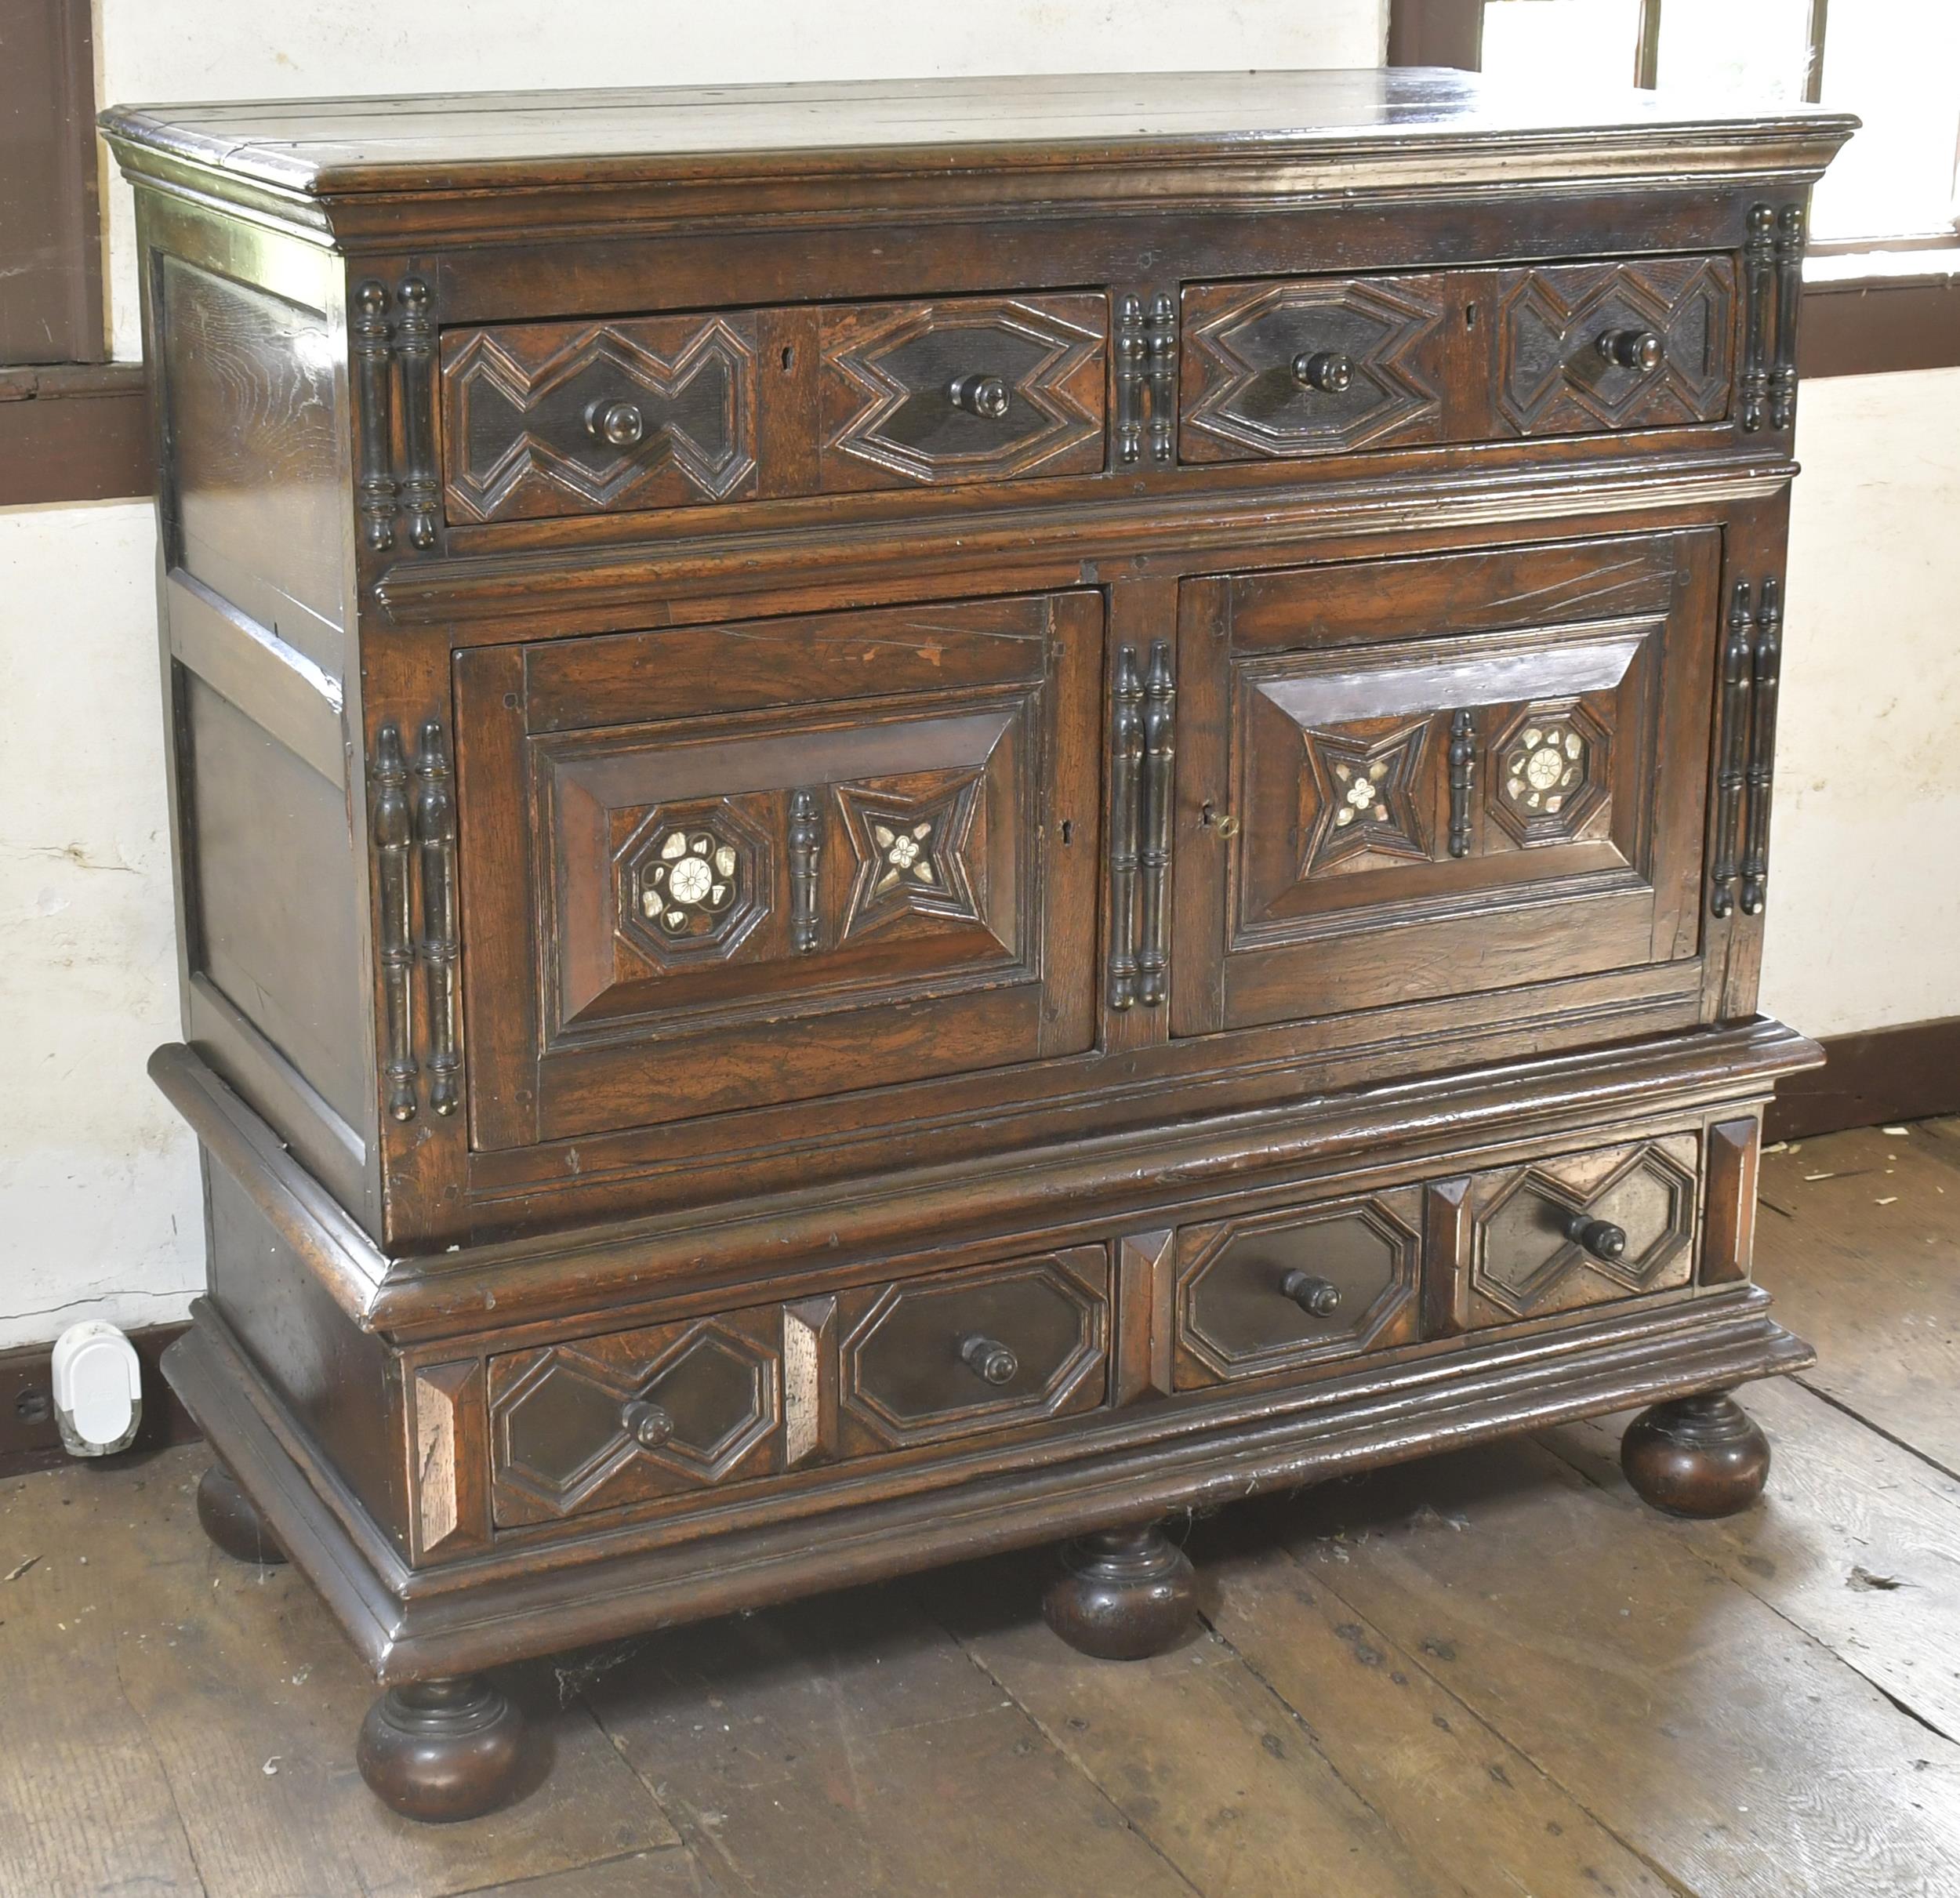 17TH C. ENGLISH CHEST ON FRAME.